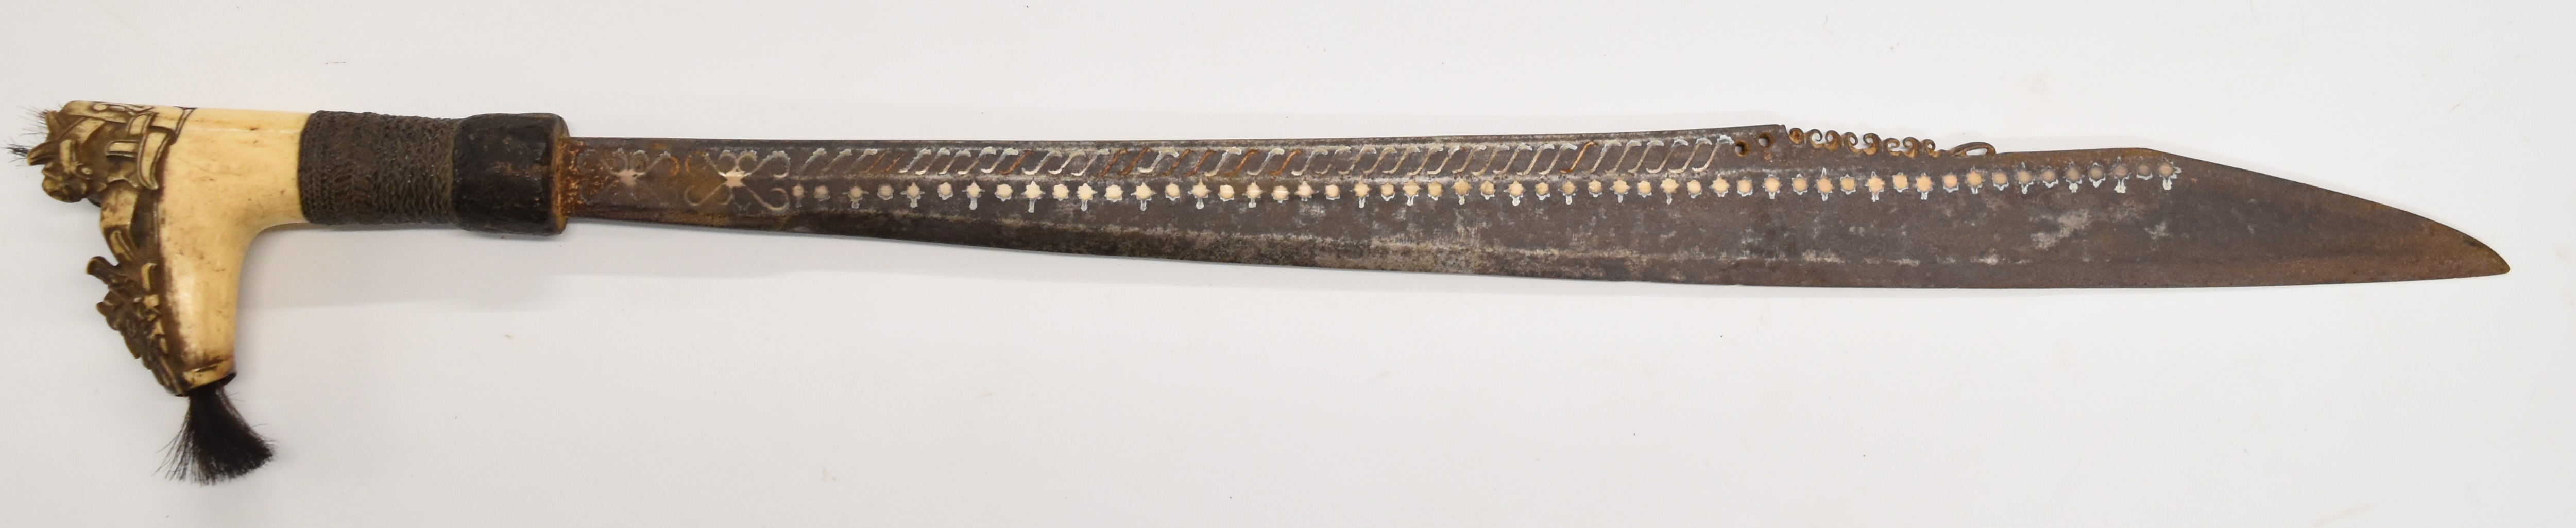 Borneo Dayak headhunter's sword with heavily carved bone hilt, hair plumes, coin inset grip, - Image 2 of 9